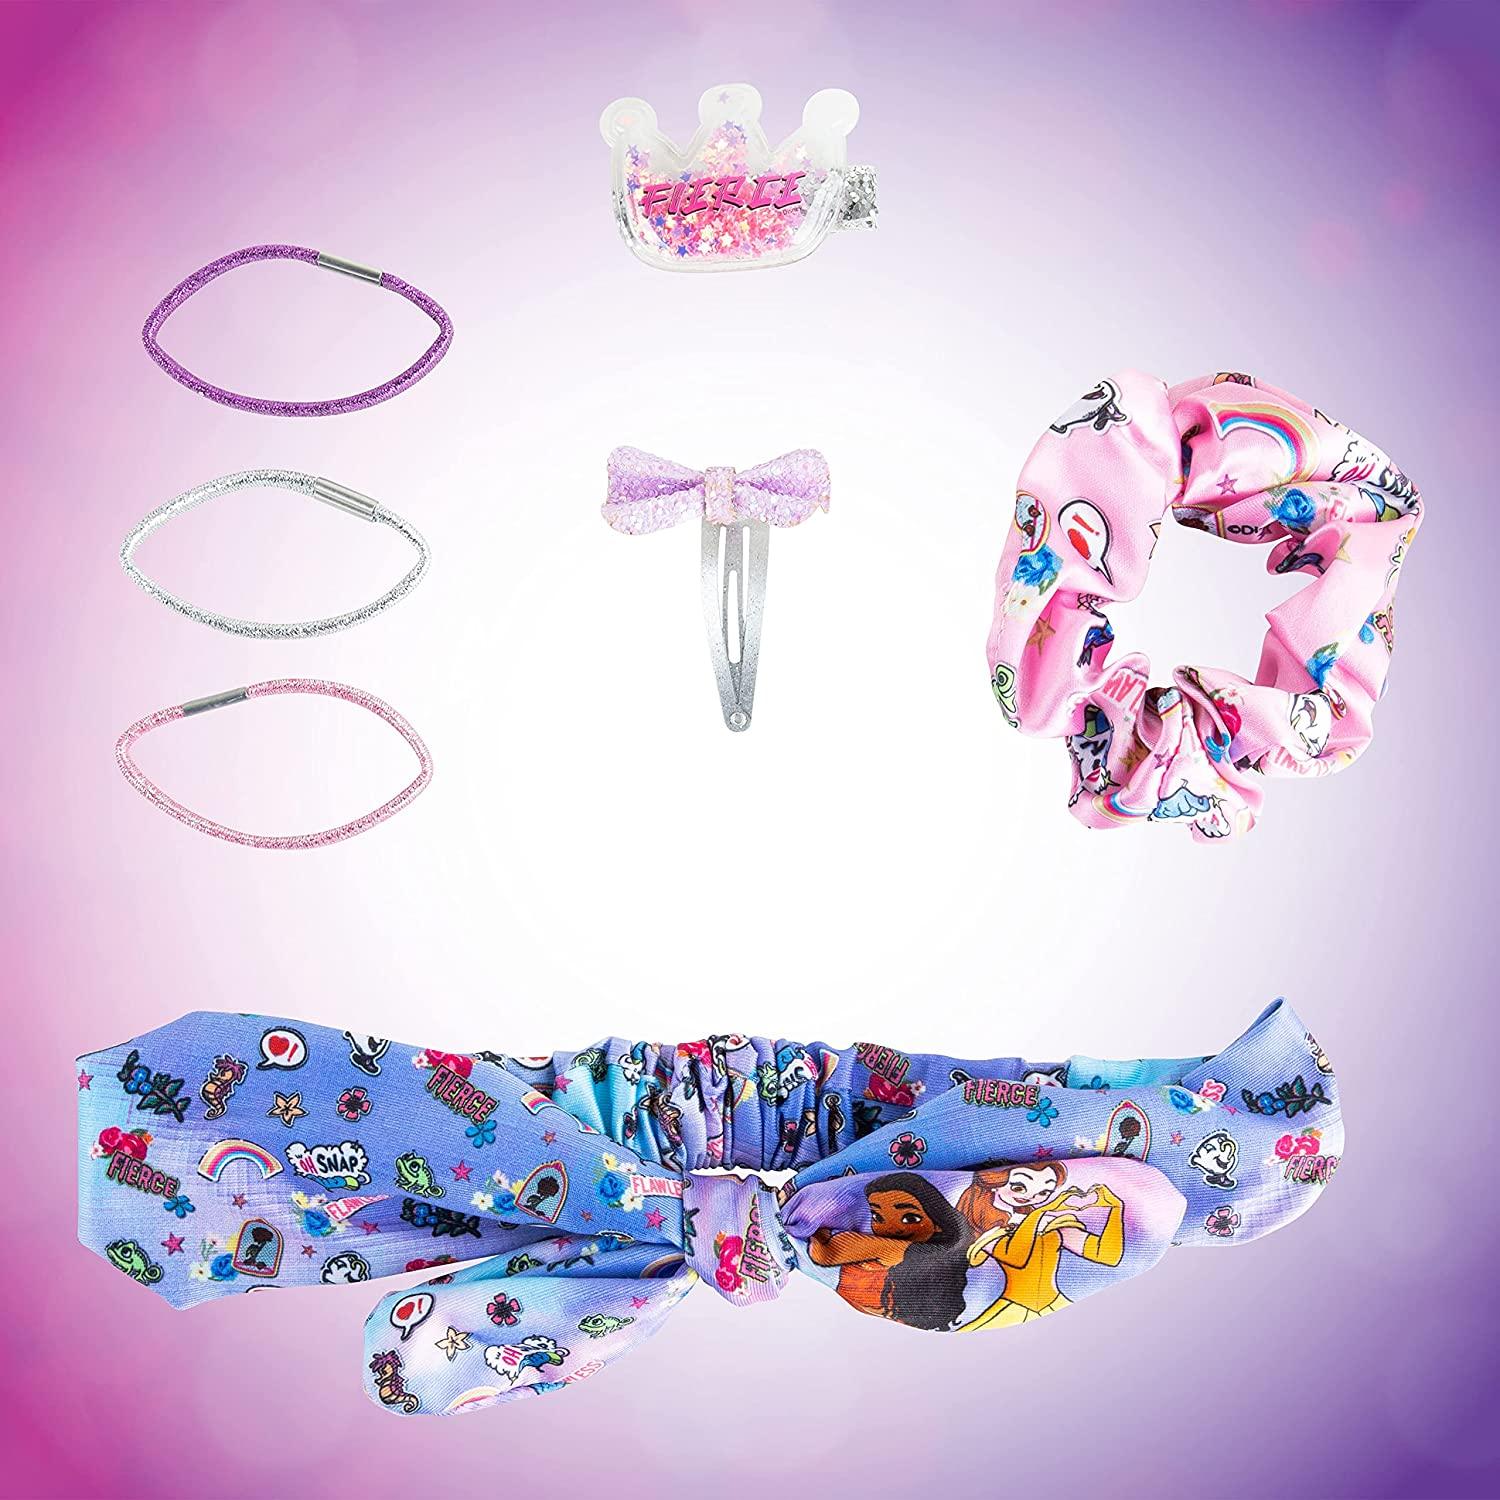 Disney Princess Hair Accessories Handbag - Exclusive Princess Accessory Bag - 7 Pcs Hair Styling Set - 2 Hair Clips - 1 Graphic Designed Scrunchie - 3 Sparkly Pony Holders